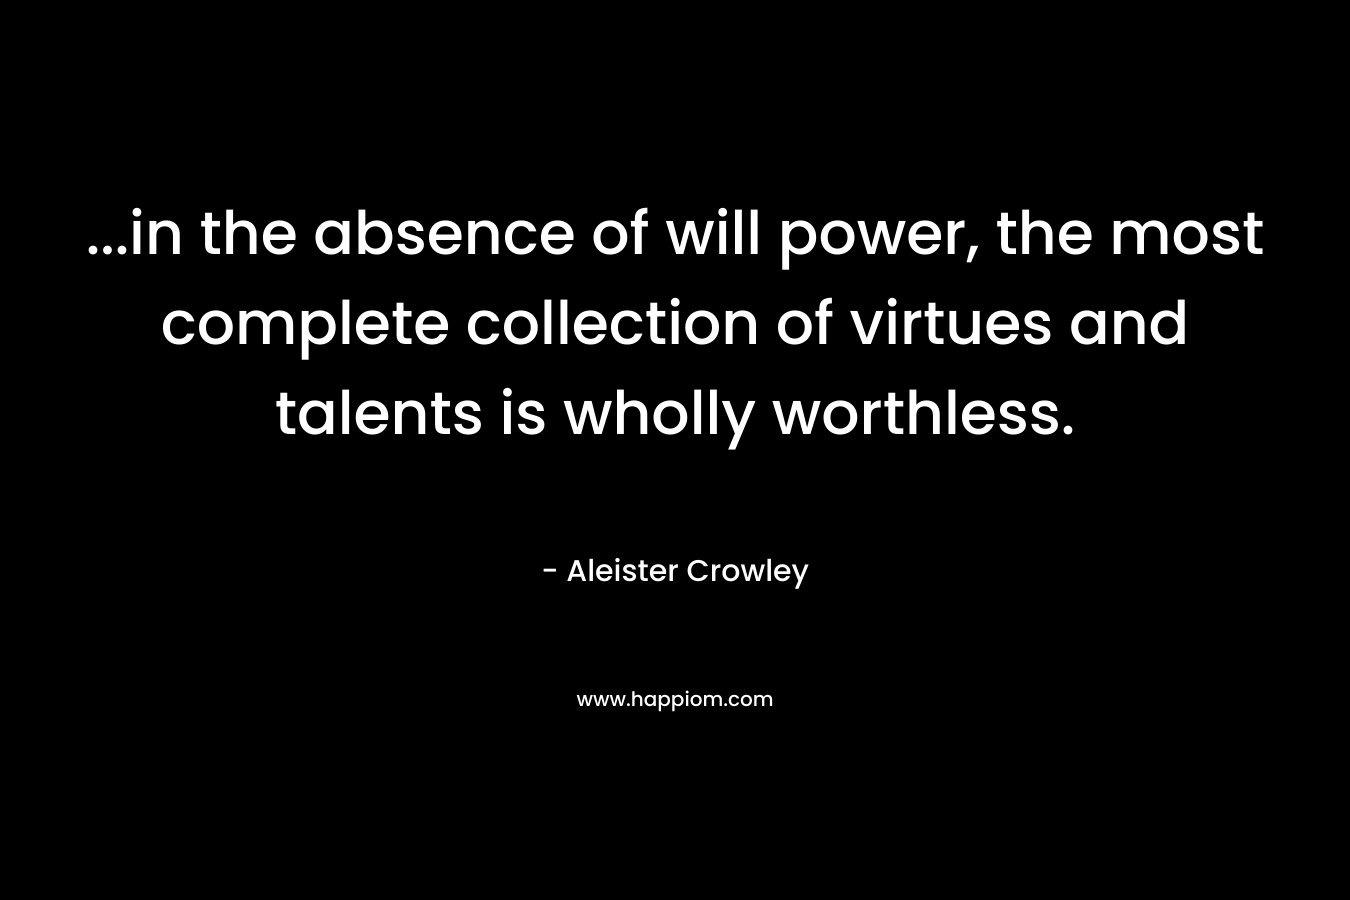 ...in the absence of will power, the most complete collection of virtues and talents is wholly worthless.